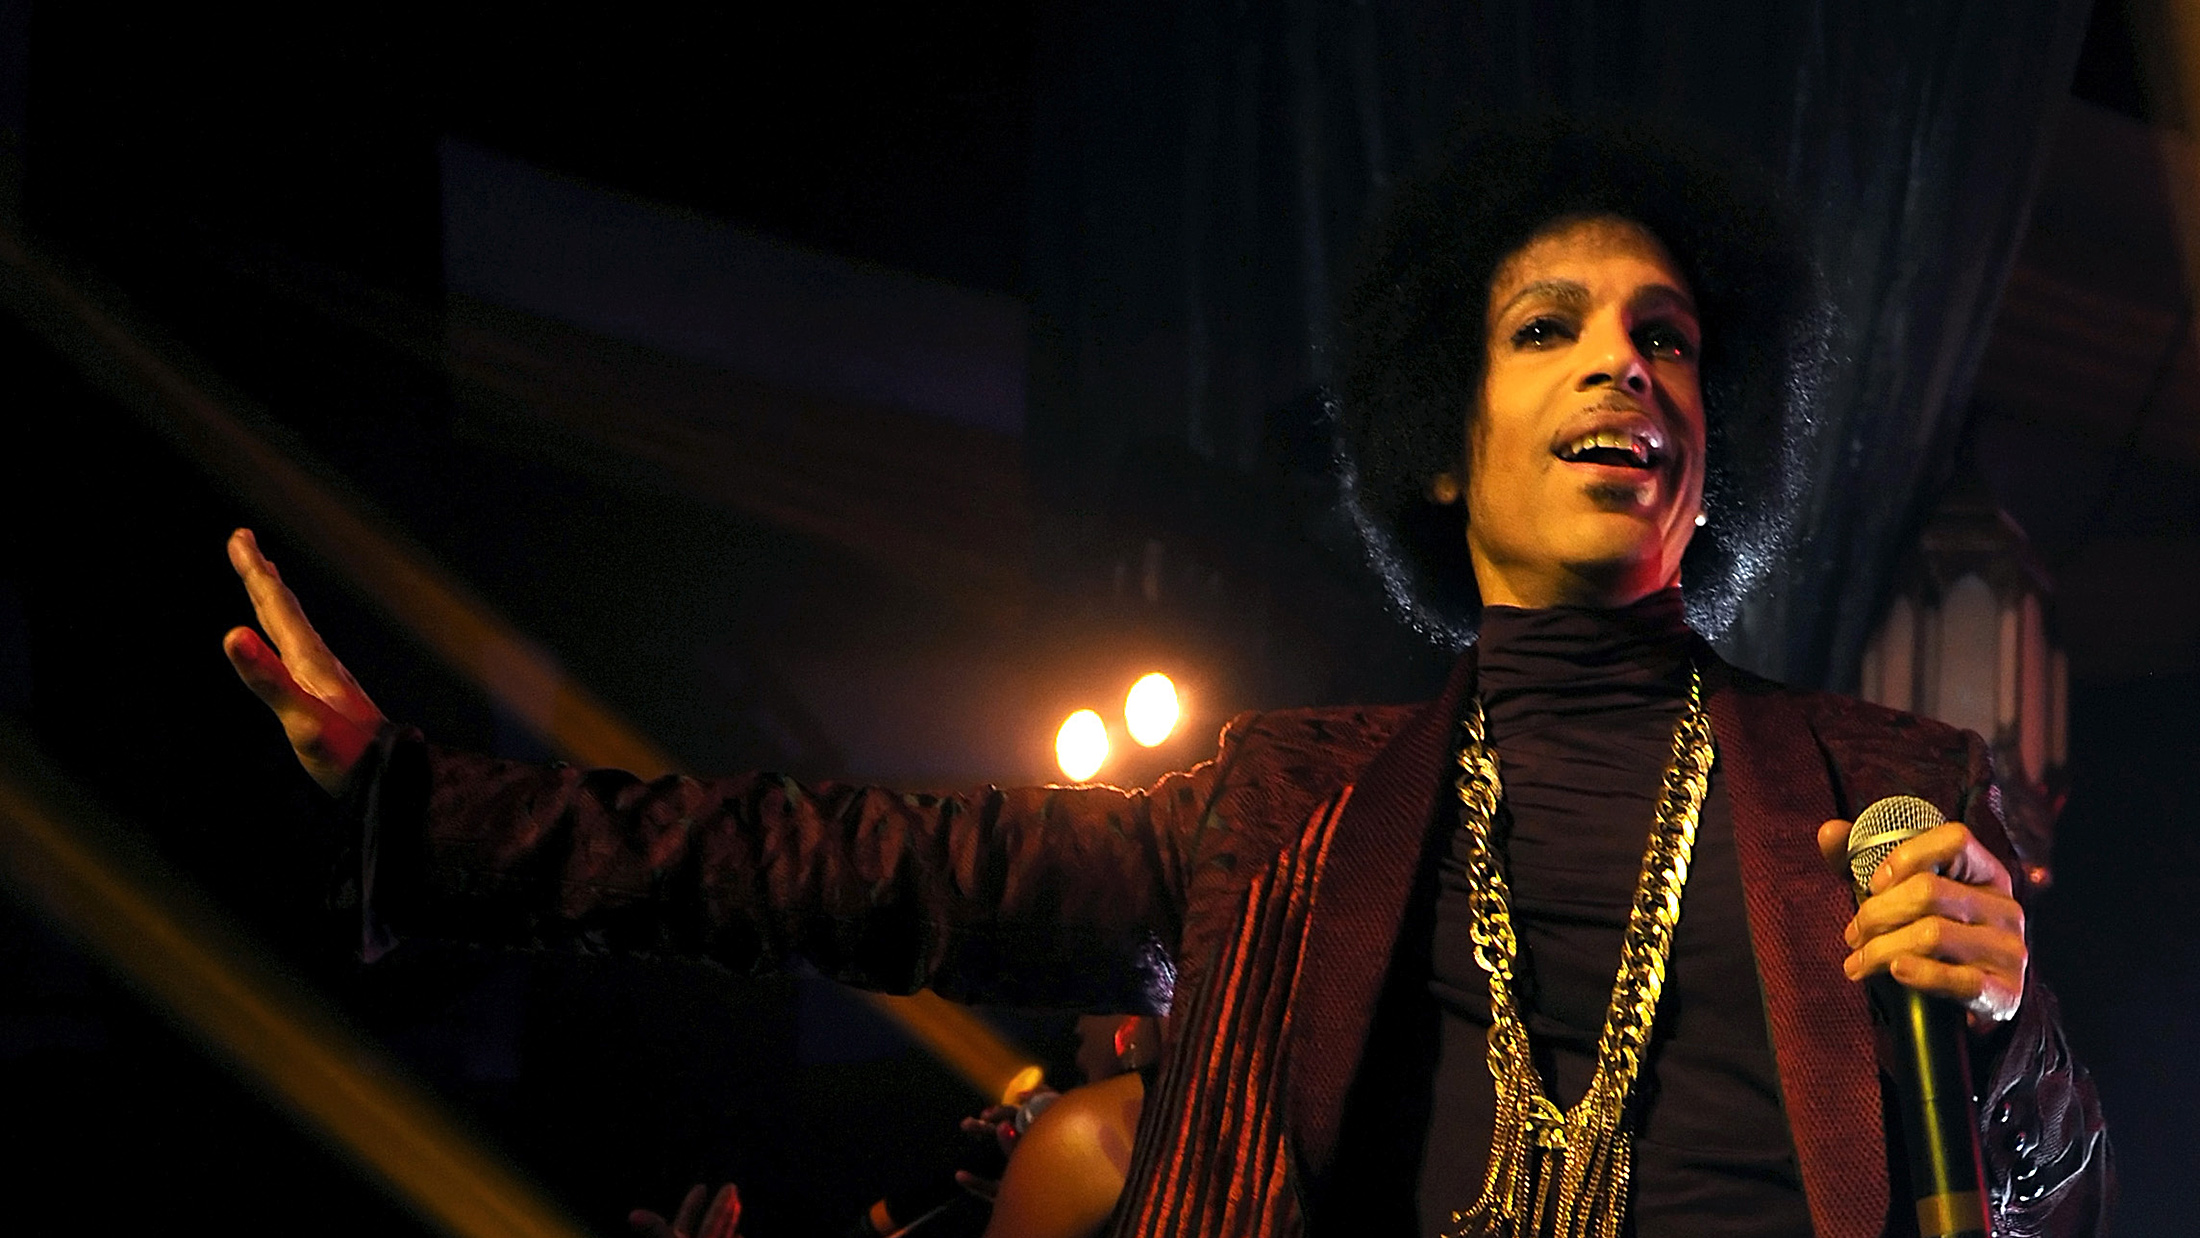 Prince performs onstage at The Hollywood Palladium on March 8, 2014 in Los Angeles, California.
